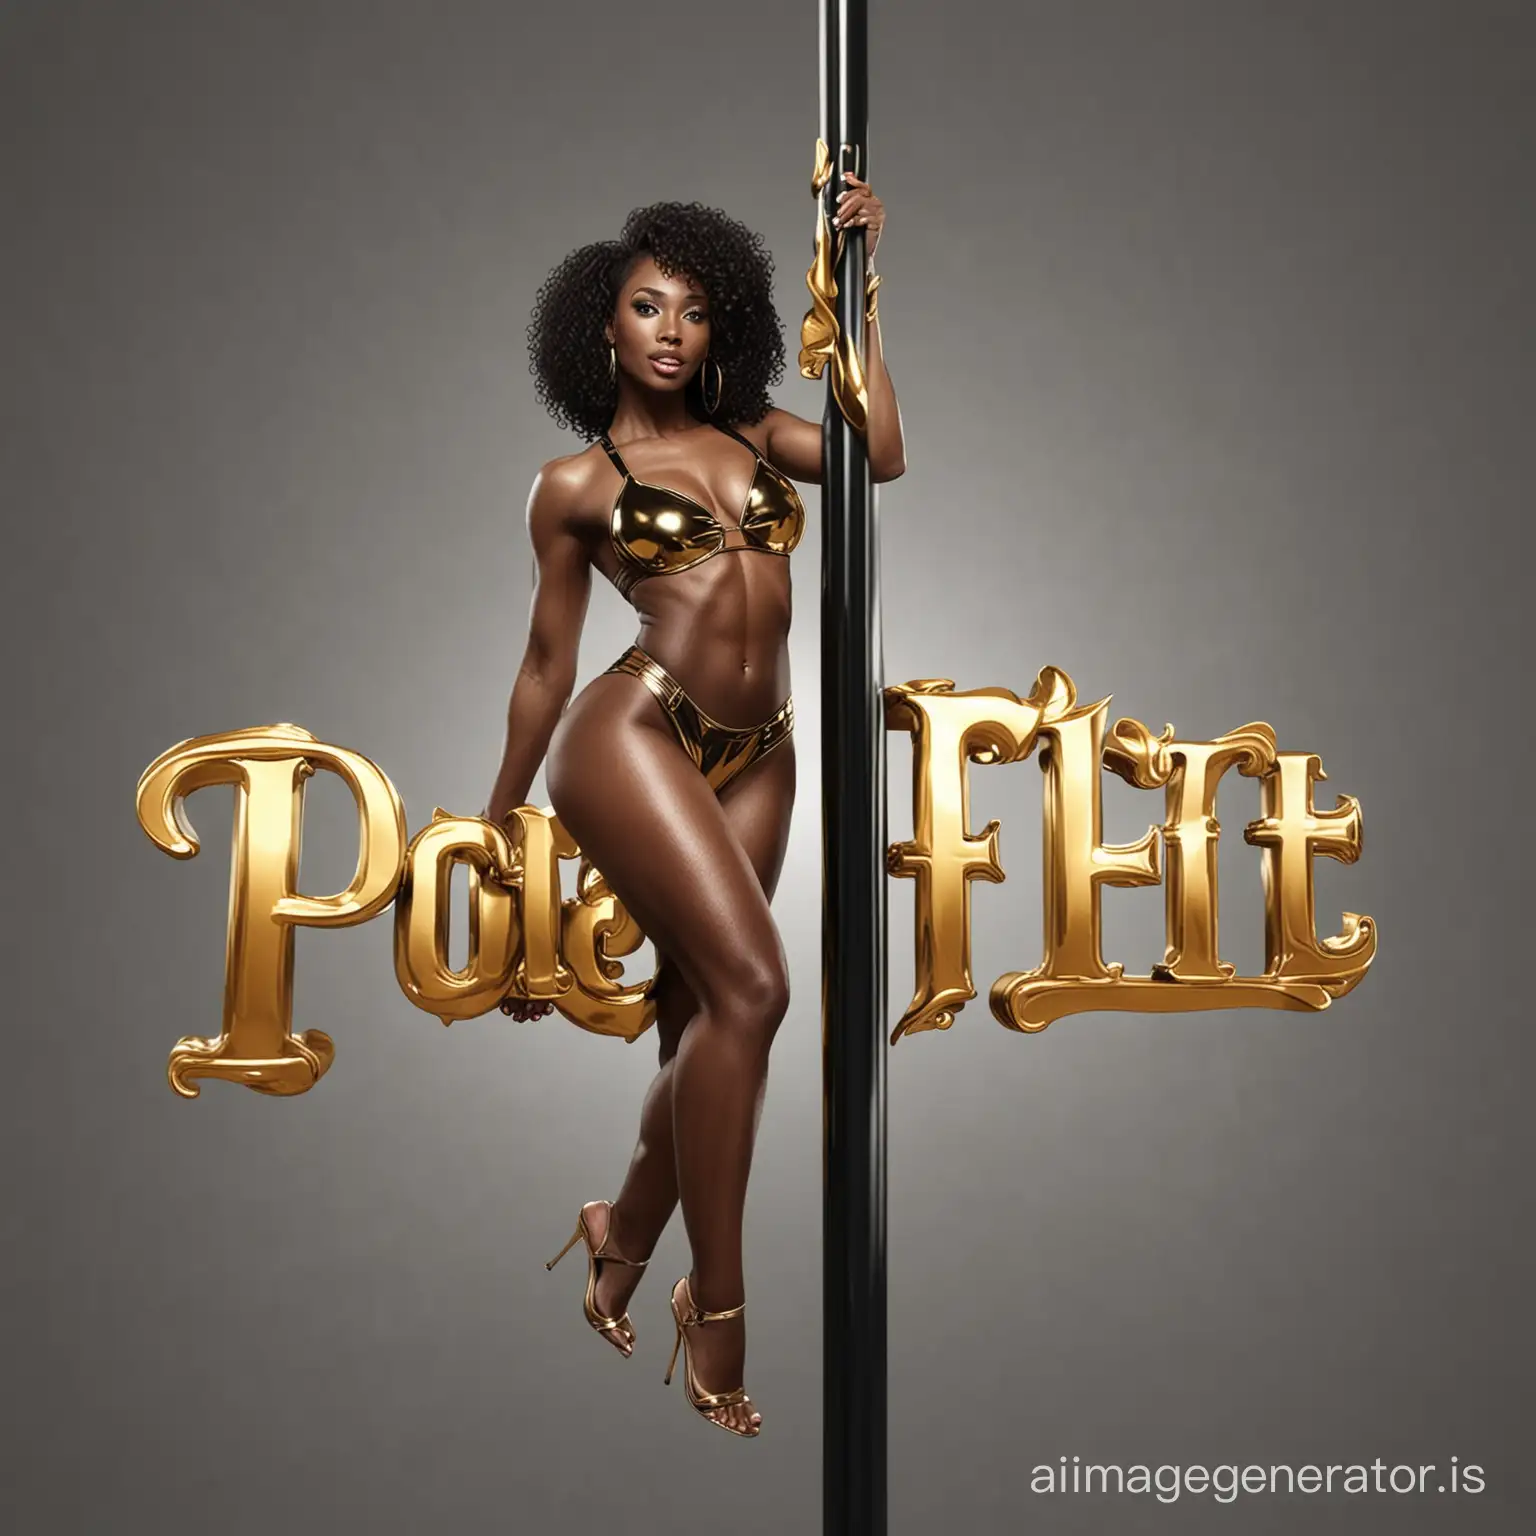 Sleek-Metallic-3D-Logo-Pole-Fit-101-Featuring-a-Stunning-Black-Woman-in-Gold-Accents